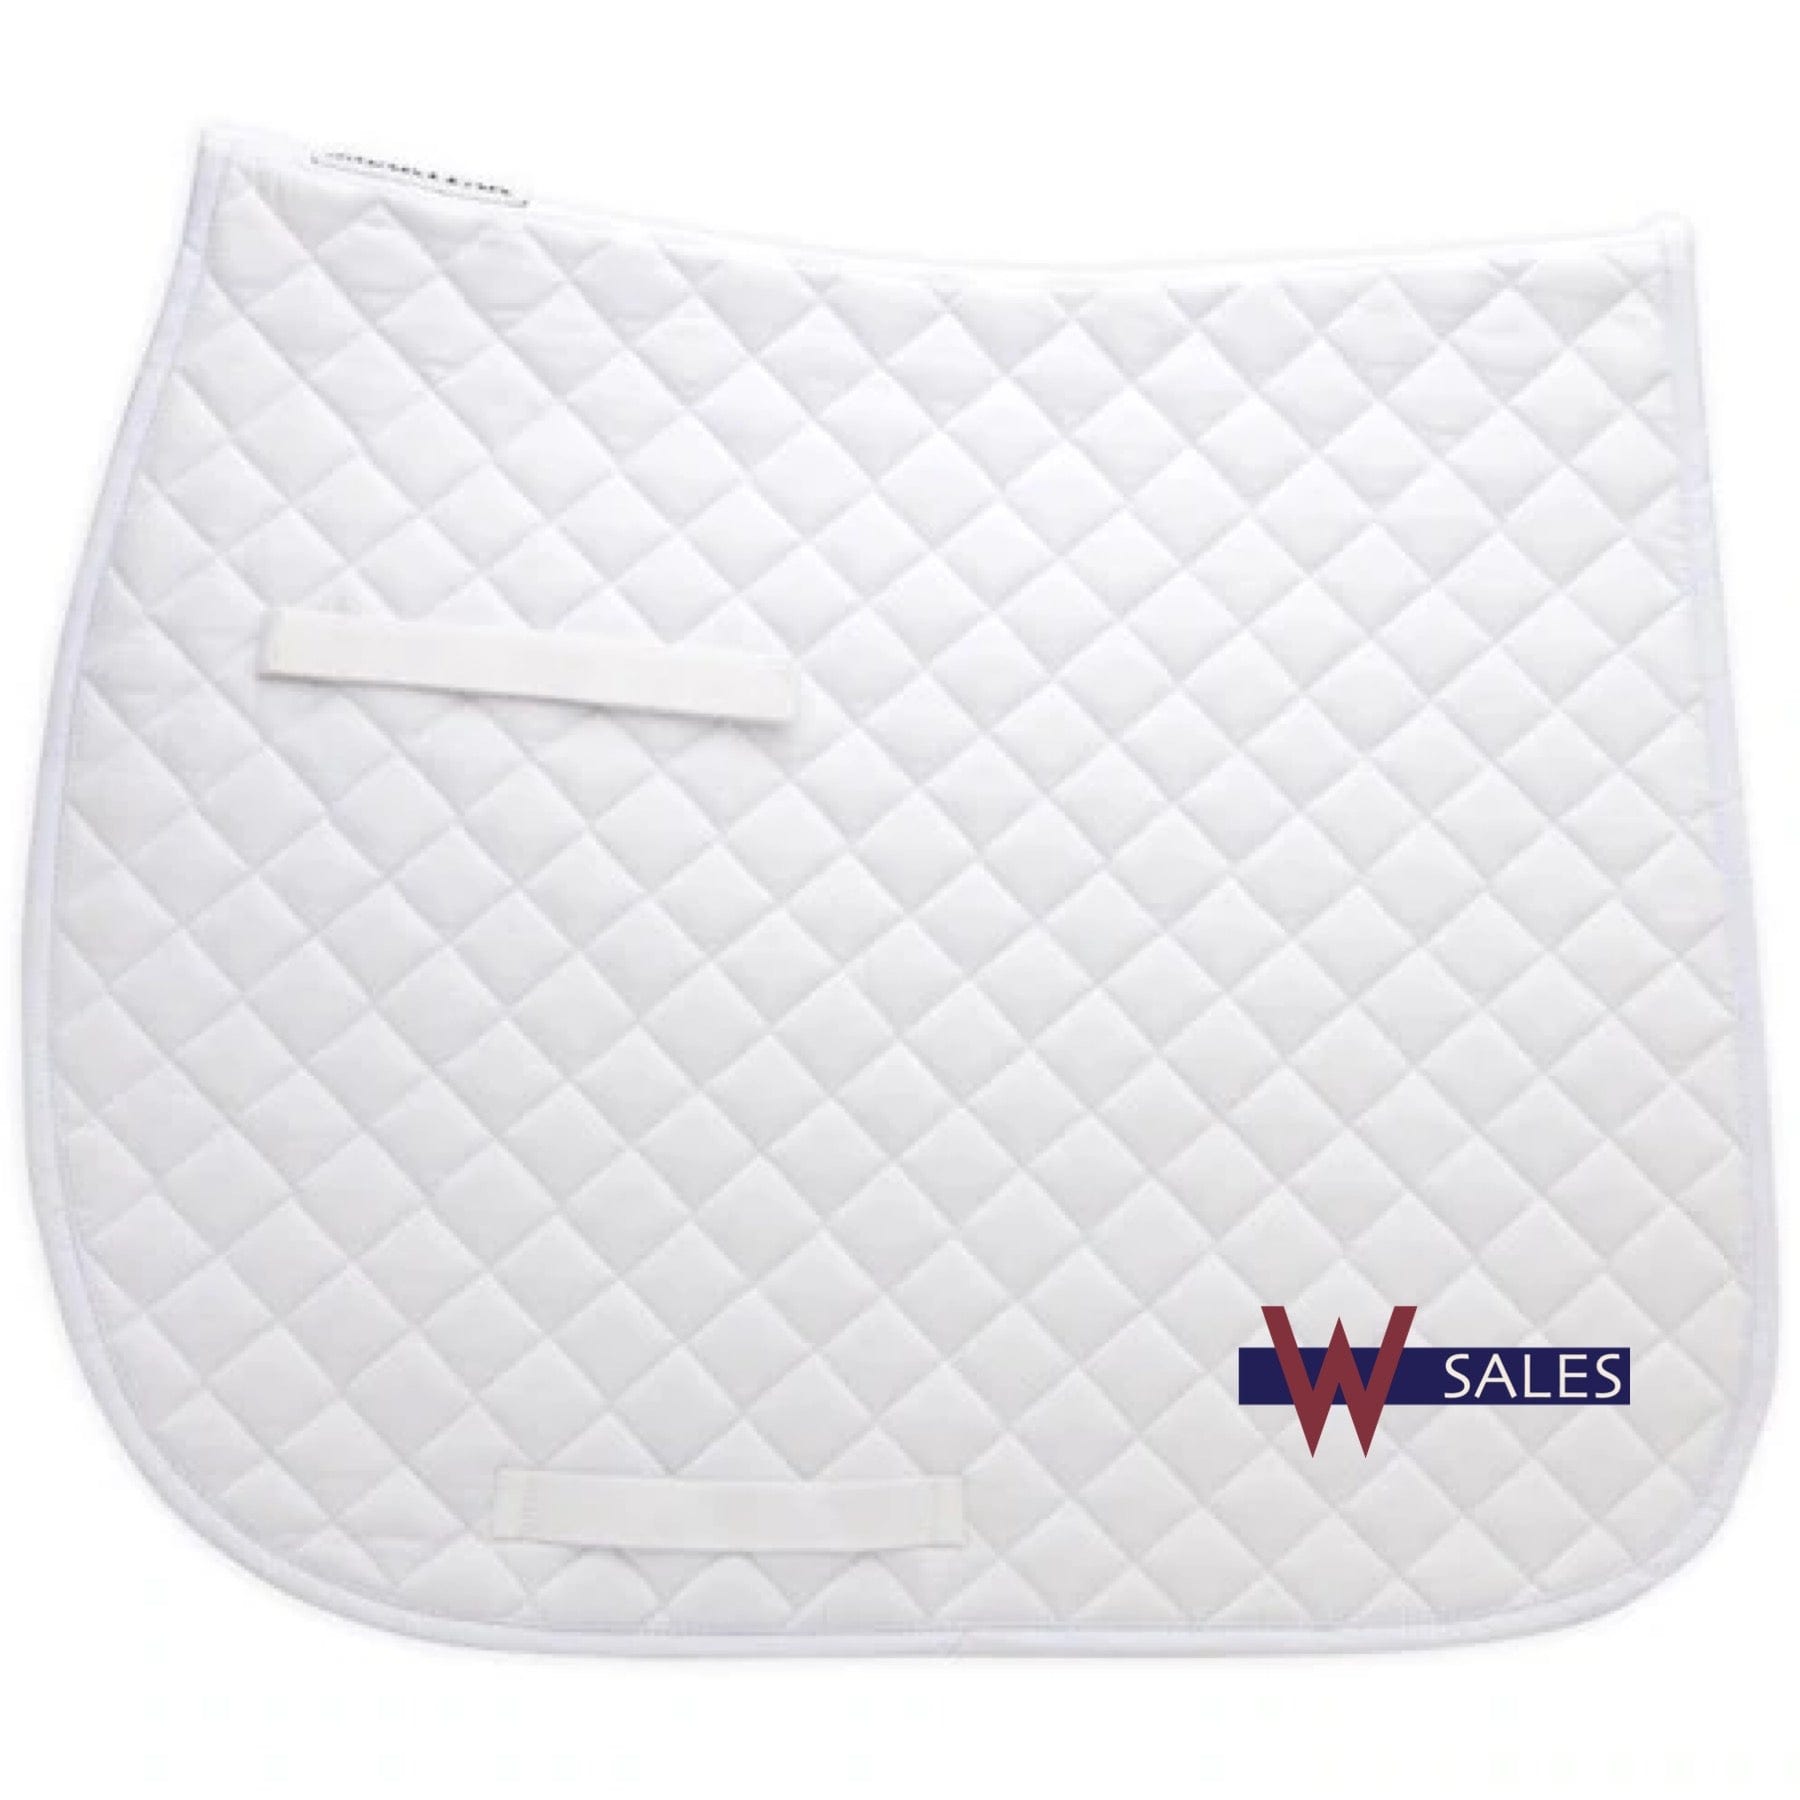 Equestrian Team Apparel WSI Sales - Dressage Saddle Pad equestrian team apparel online tack store mobile tack store custom farm apparel custom show stable clothing equestrian lifestyle horse show clothing riding clothes horses equestrian tack store